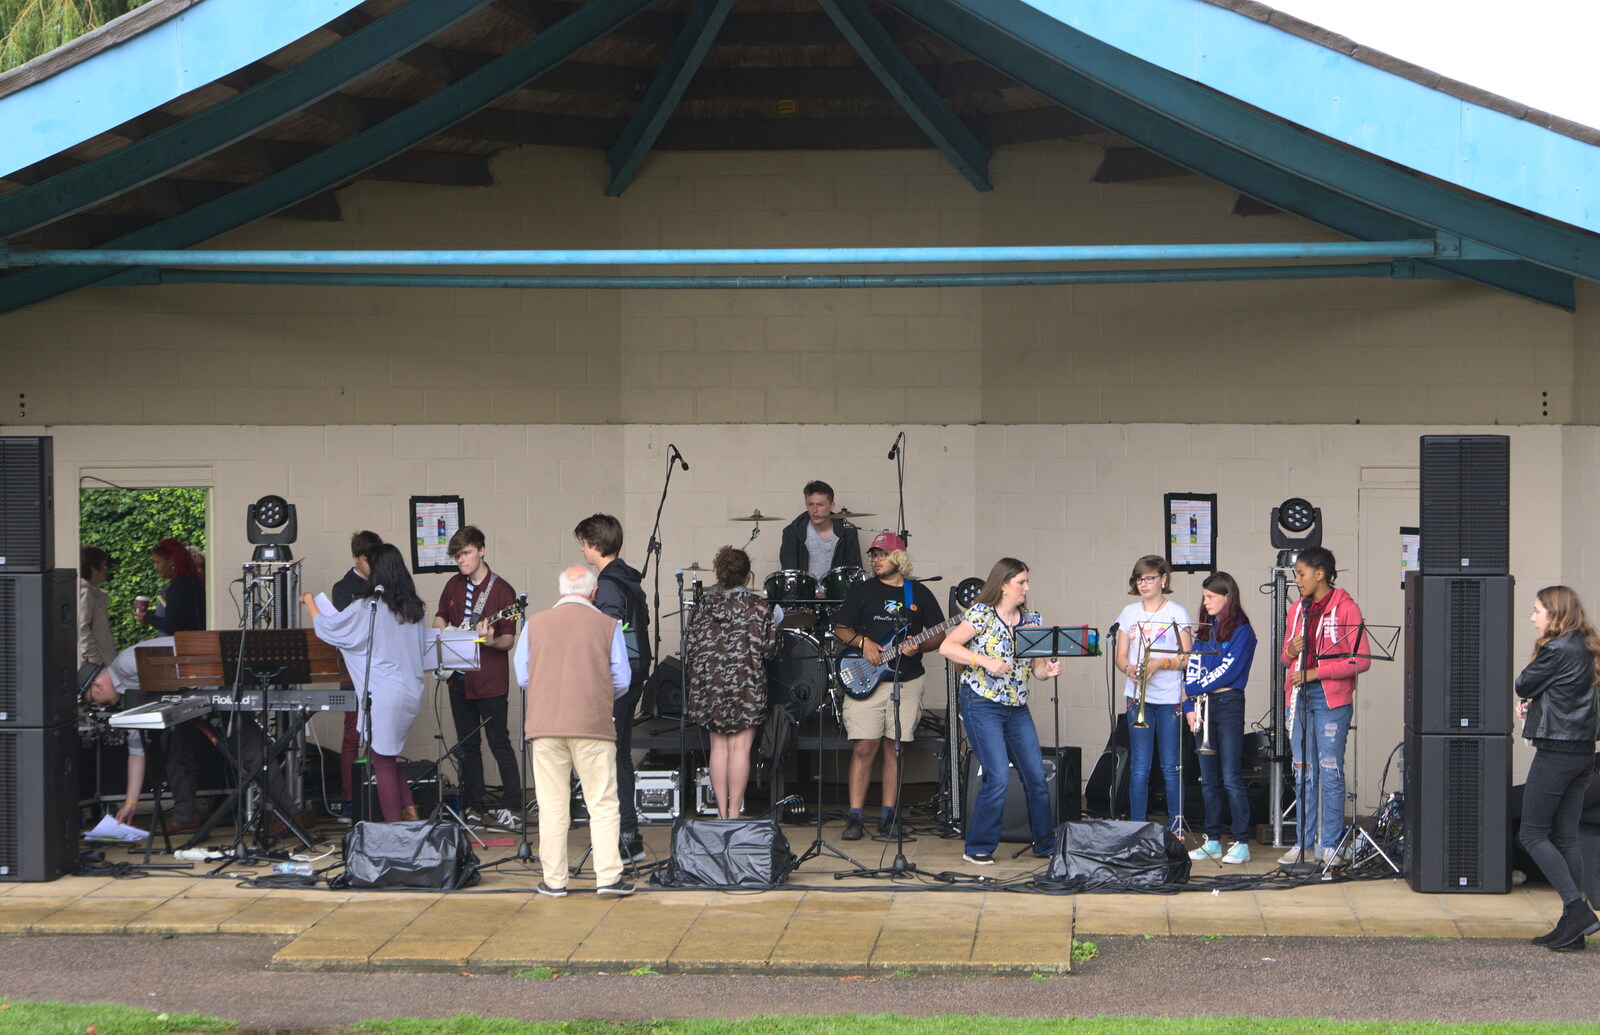 Diss High School students set up from Diss Fest, or Singin' in the Rain, Diss, Norfolk - 23rd July 2017